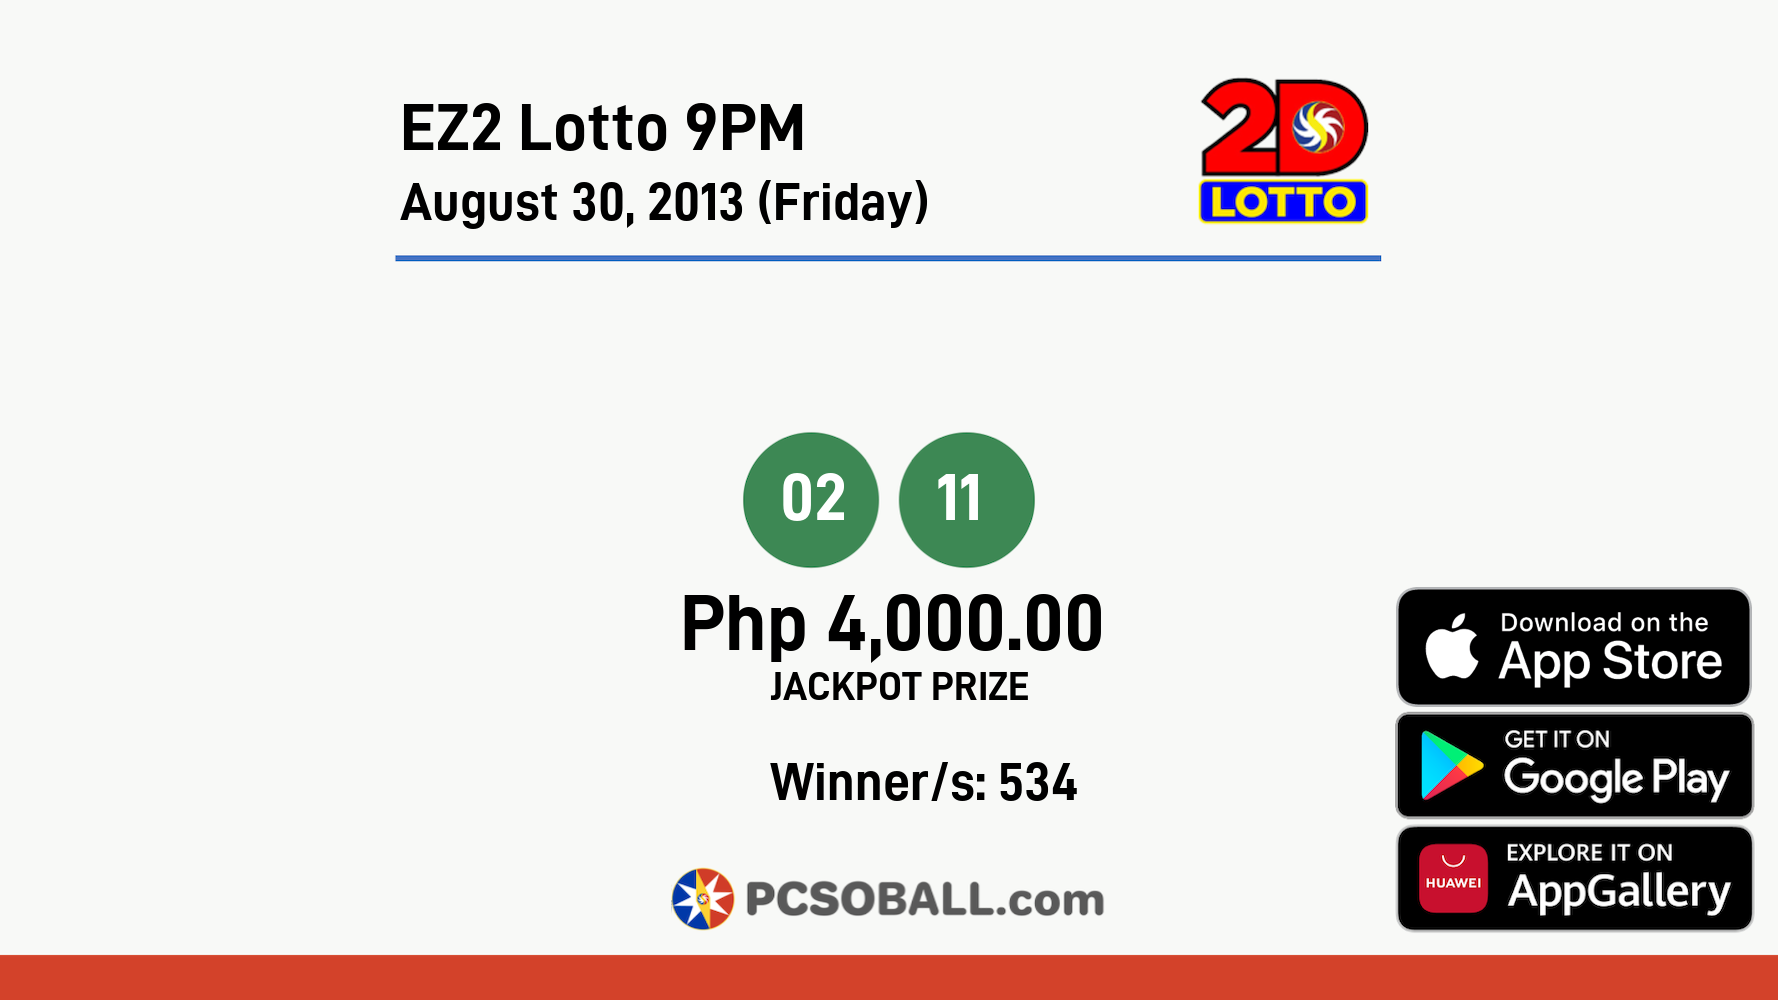 EZ2 Lotto 9PM August 30, 2013 (Friday) Result